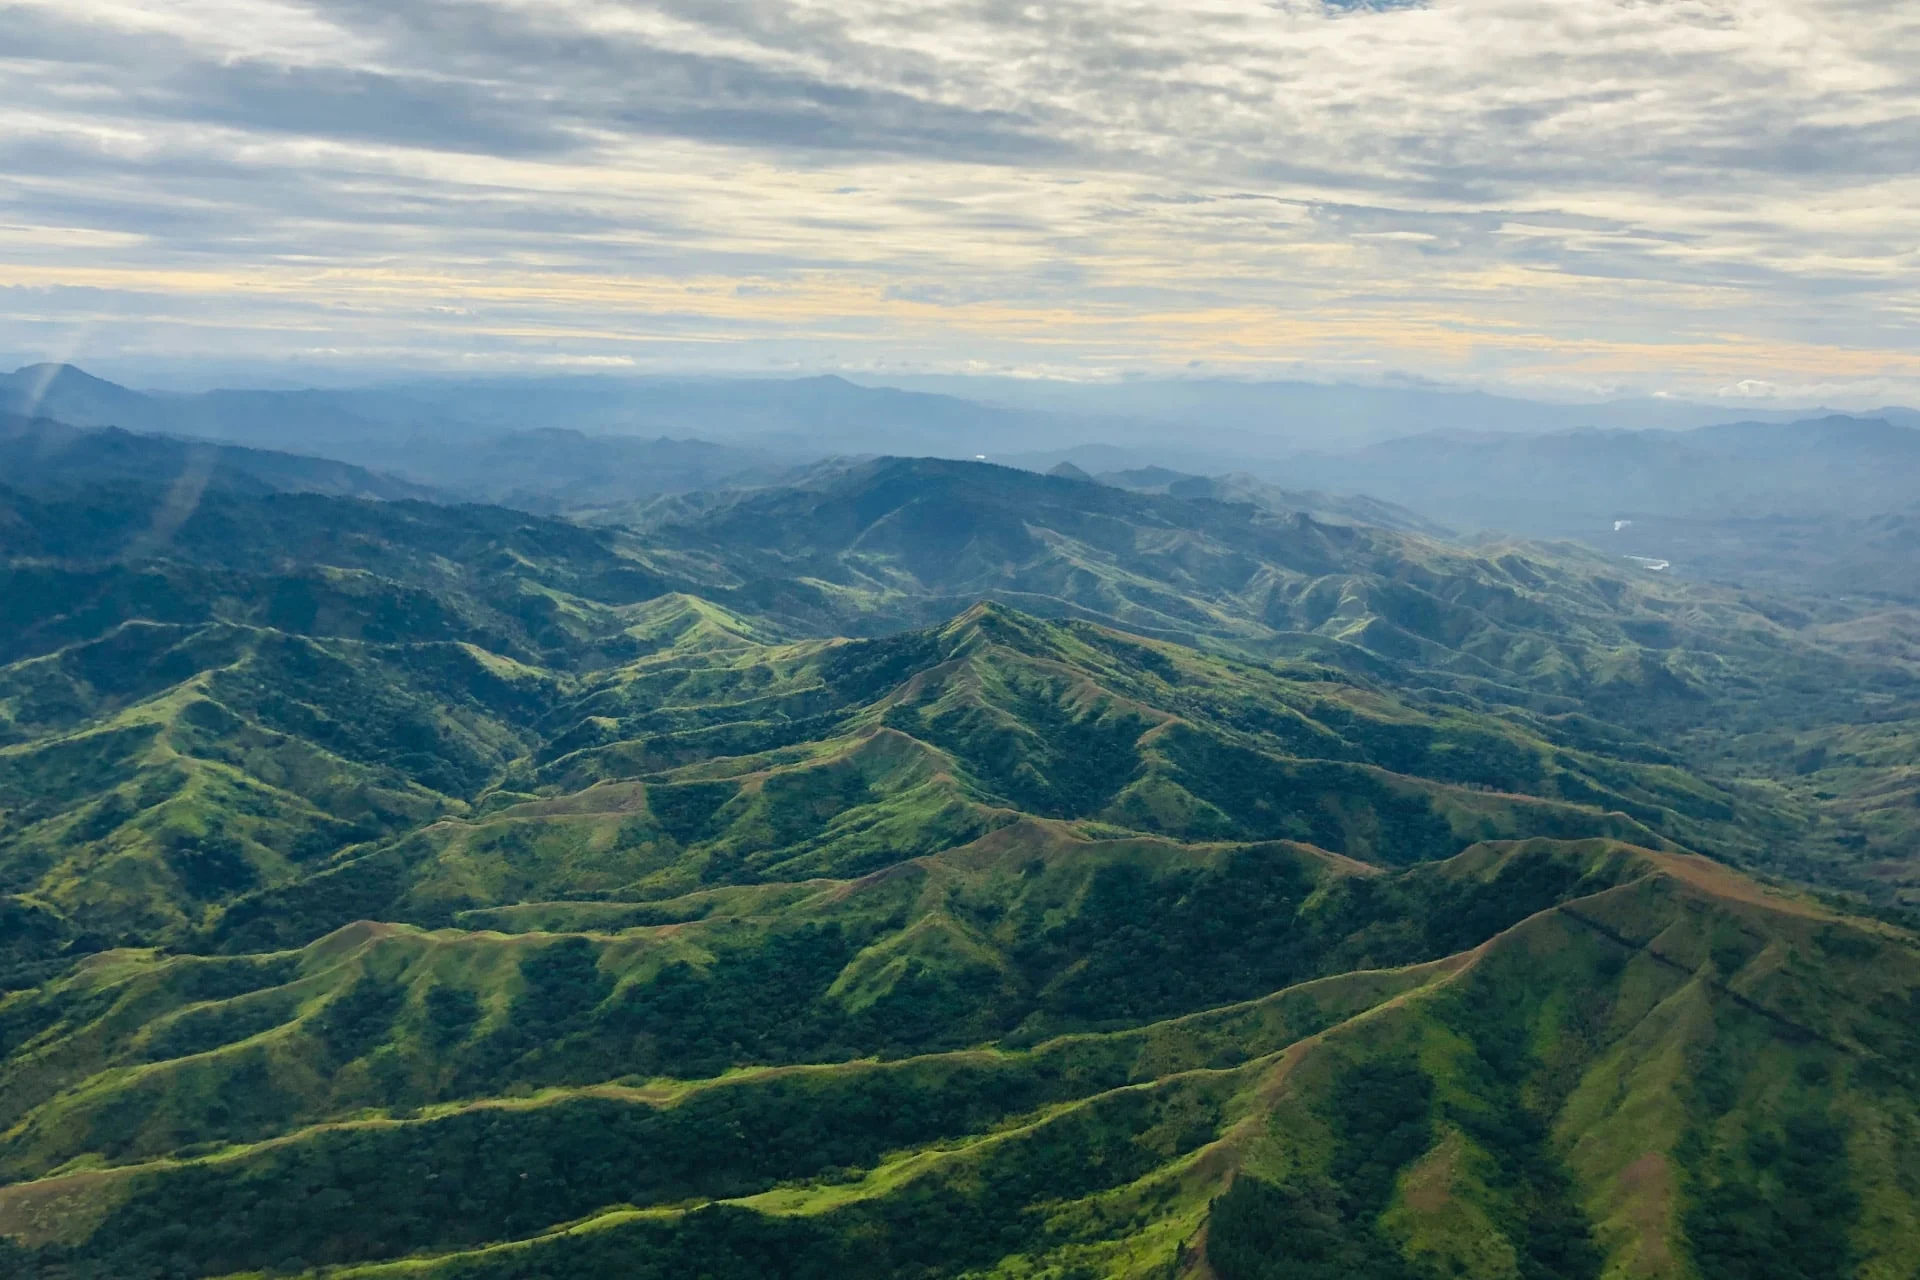 An aerial view of a green mountain range.